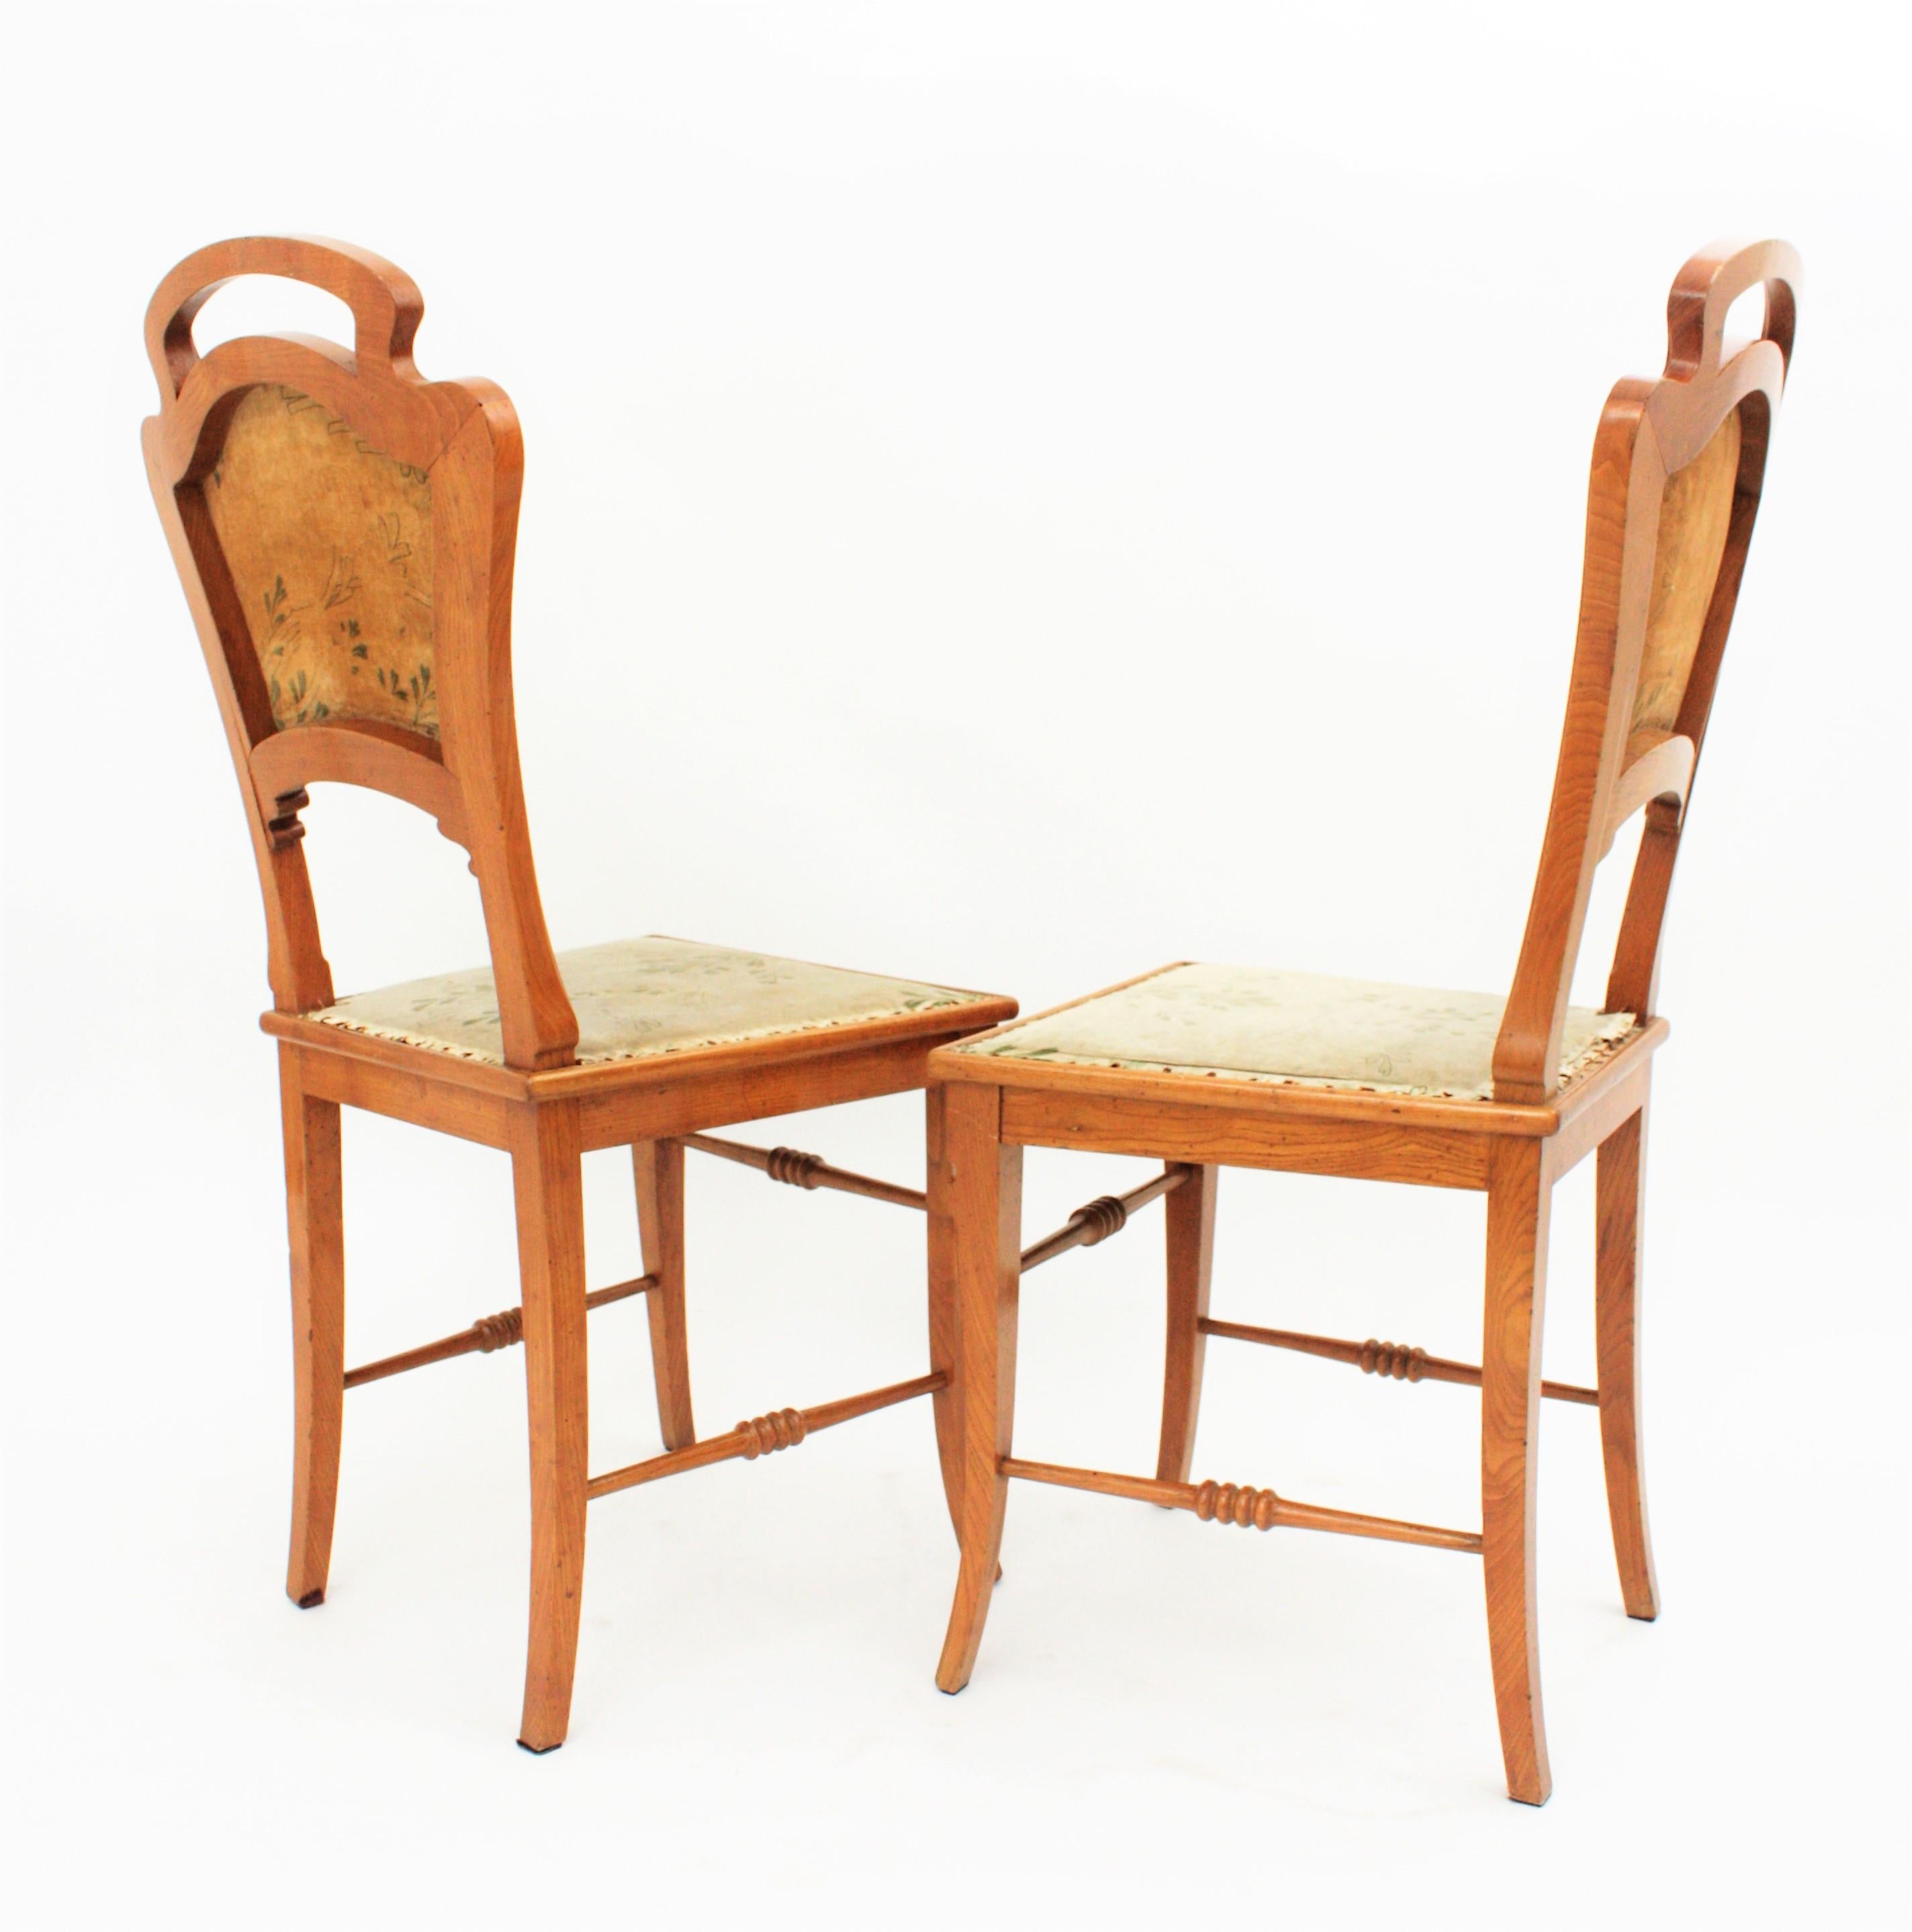 Spanish Art Nouveau Antoni Gaudi Style Pair of Carved Ashwood Side Chairs For Sale 1